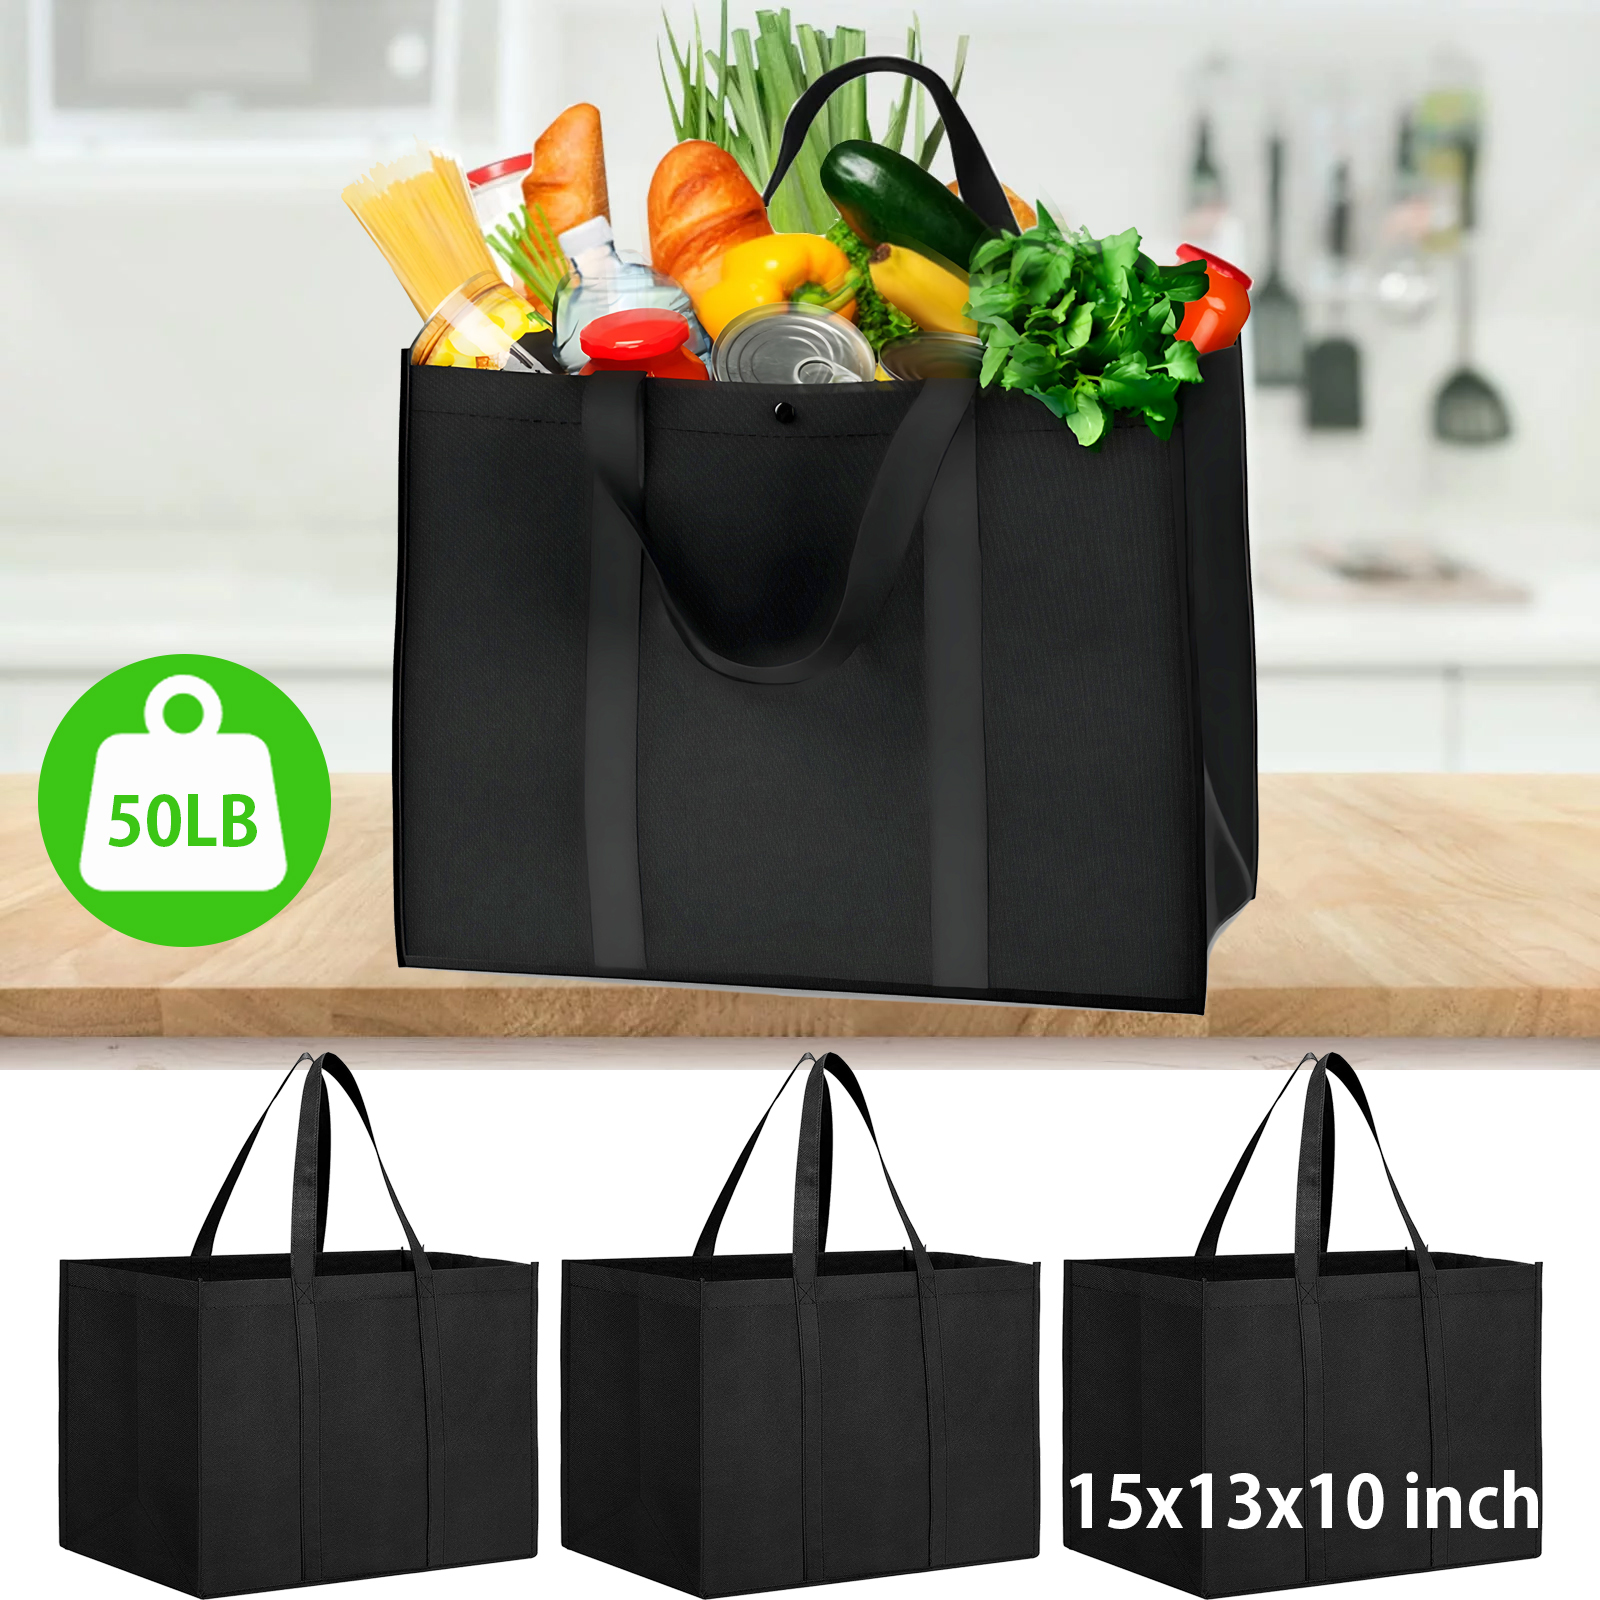 Set of 3 Reusable Grocery Bags,Large Foldable Heavy Duty Bag, Shopping Tote Produce Bag with Reinforced Handles & Thick Plastic Support Bottom, Black Washable Storage - image 1 of 6